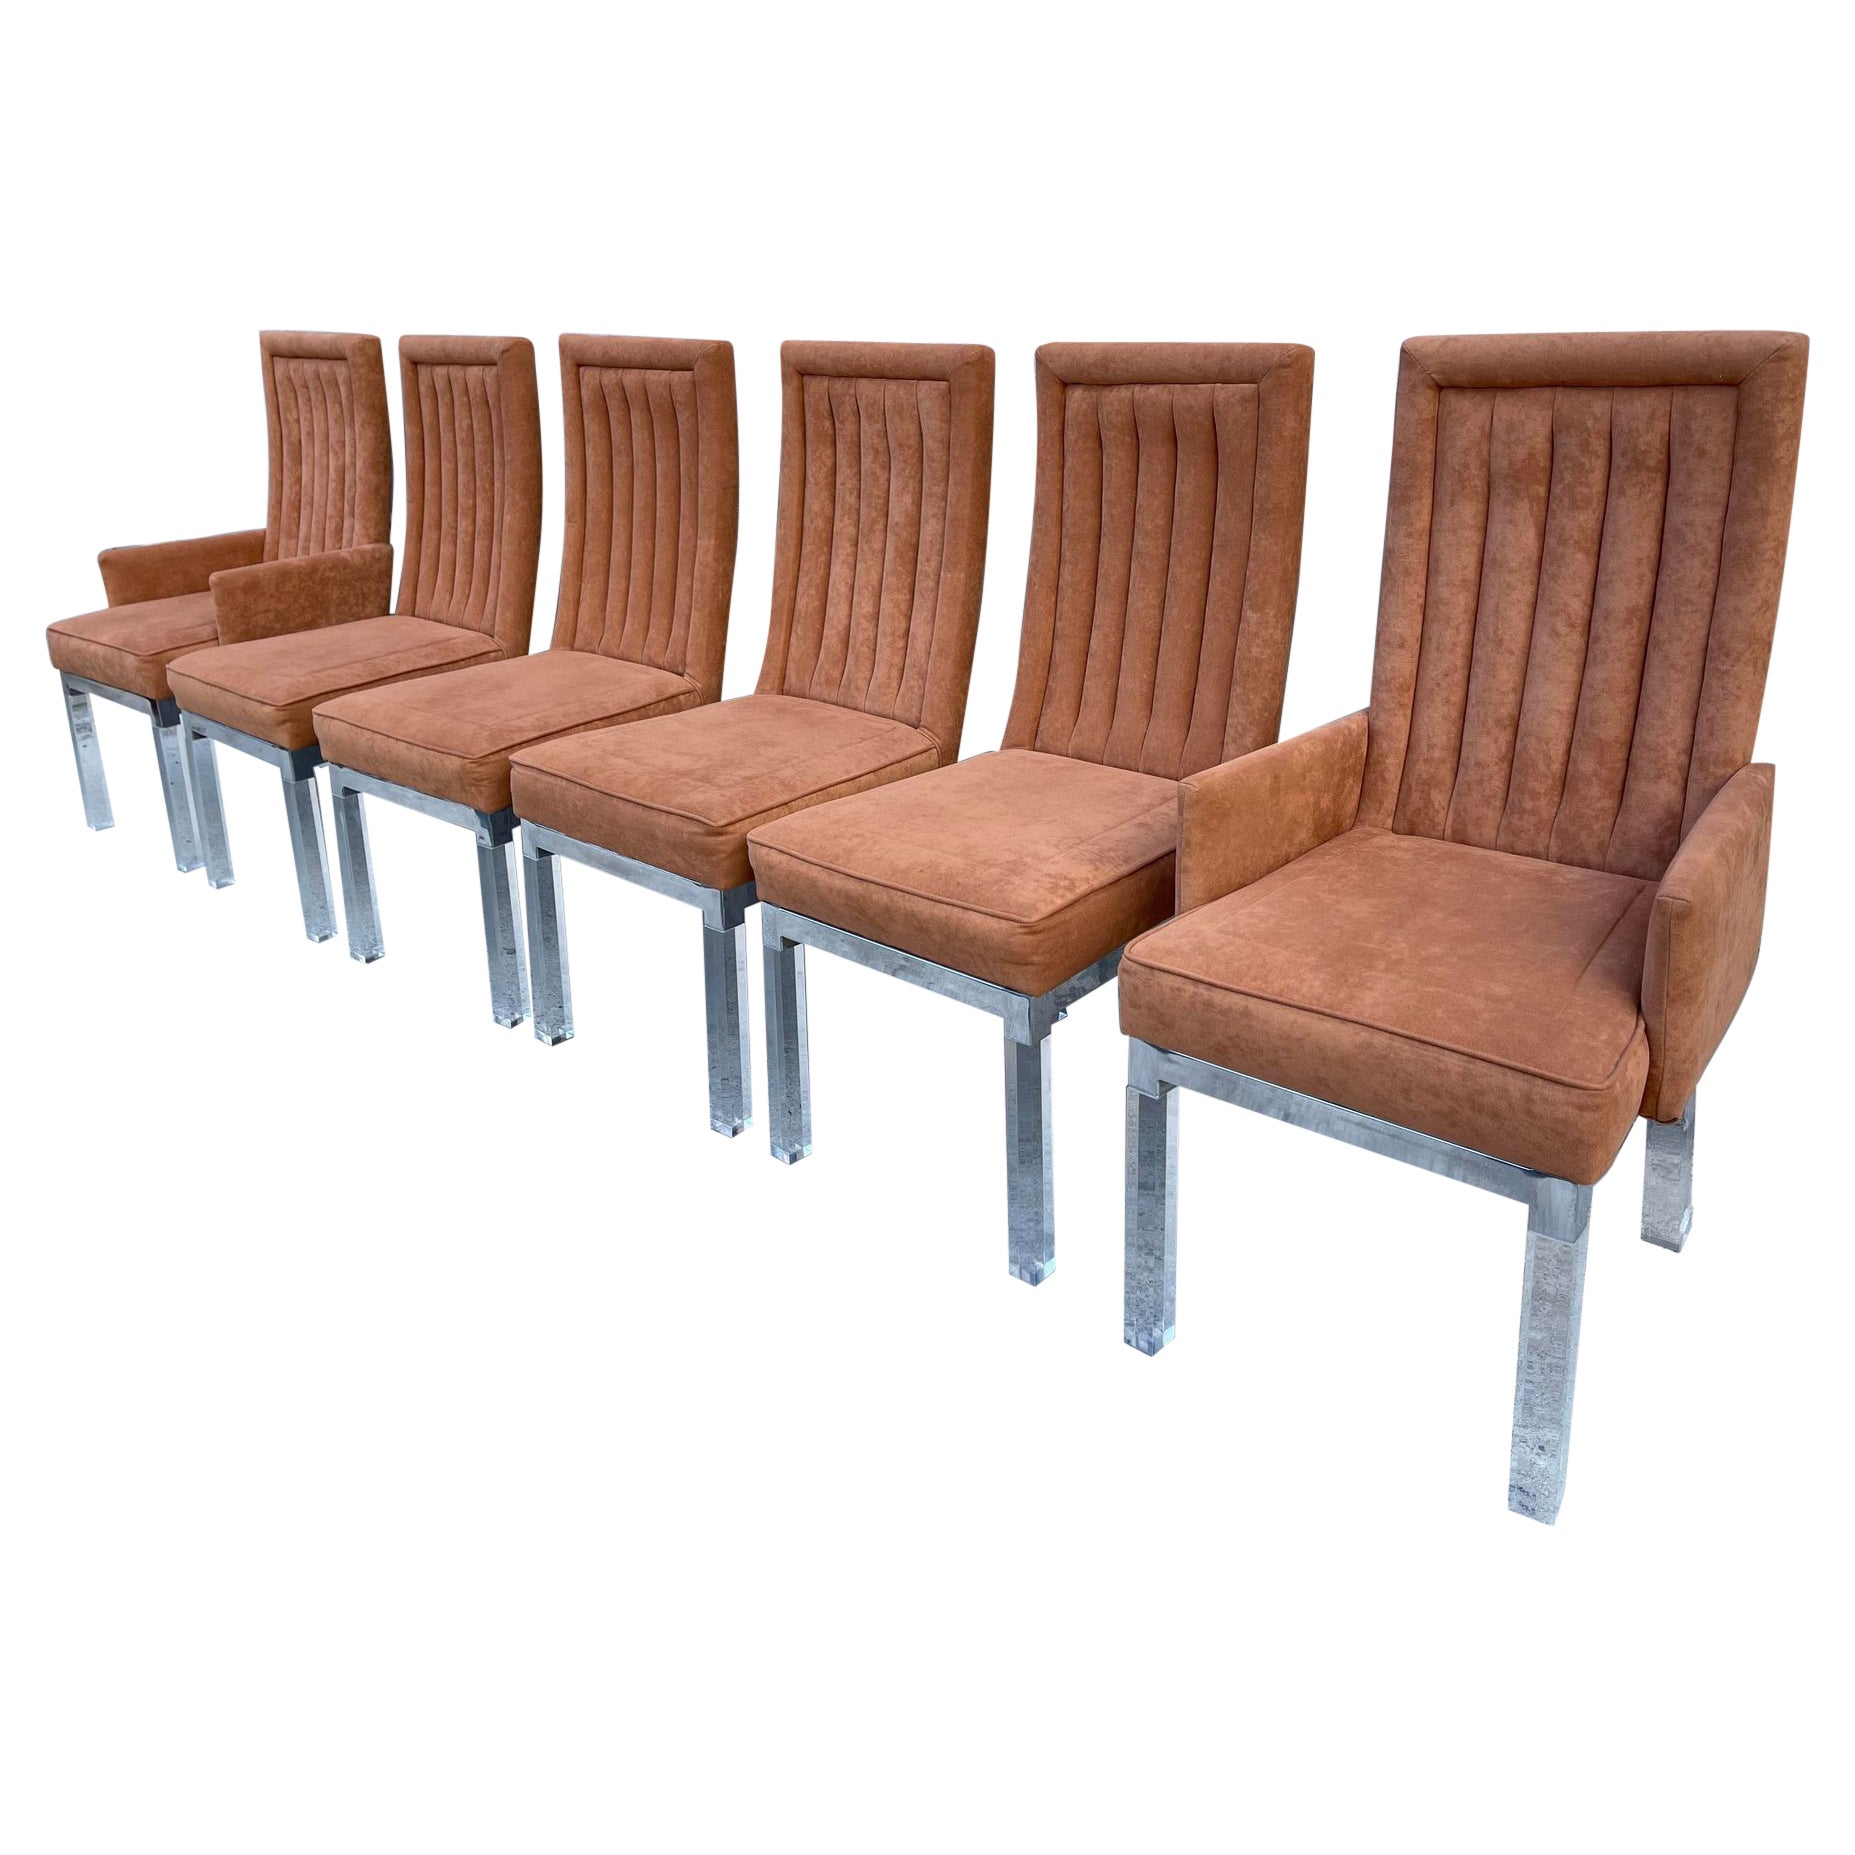 1970s Charles Hollis Jones Chrome Base Dining Chairs With Lucite Legs- Set of 6 For Sale